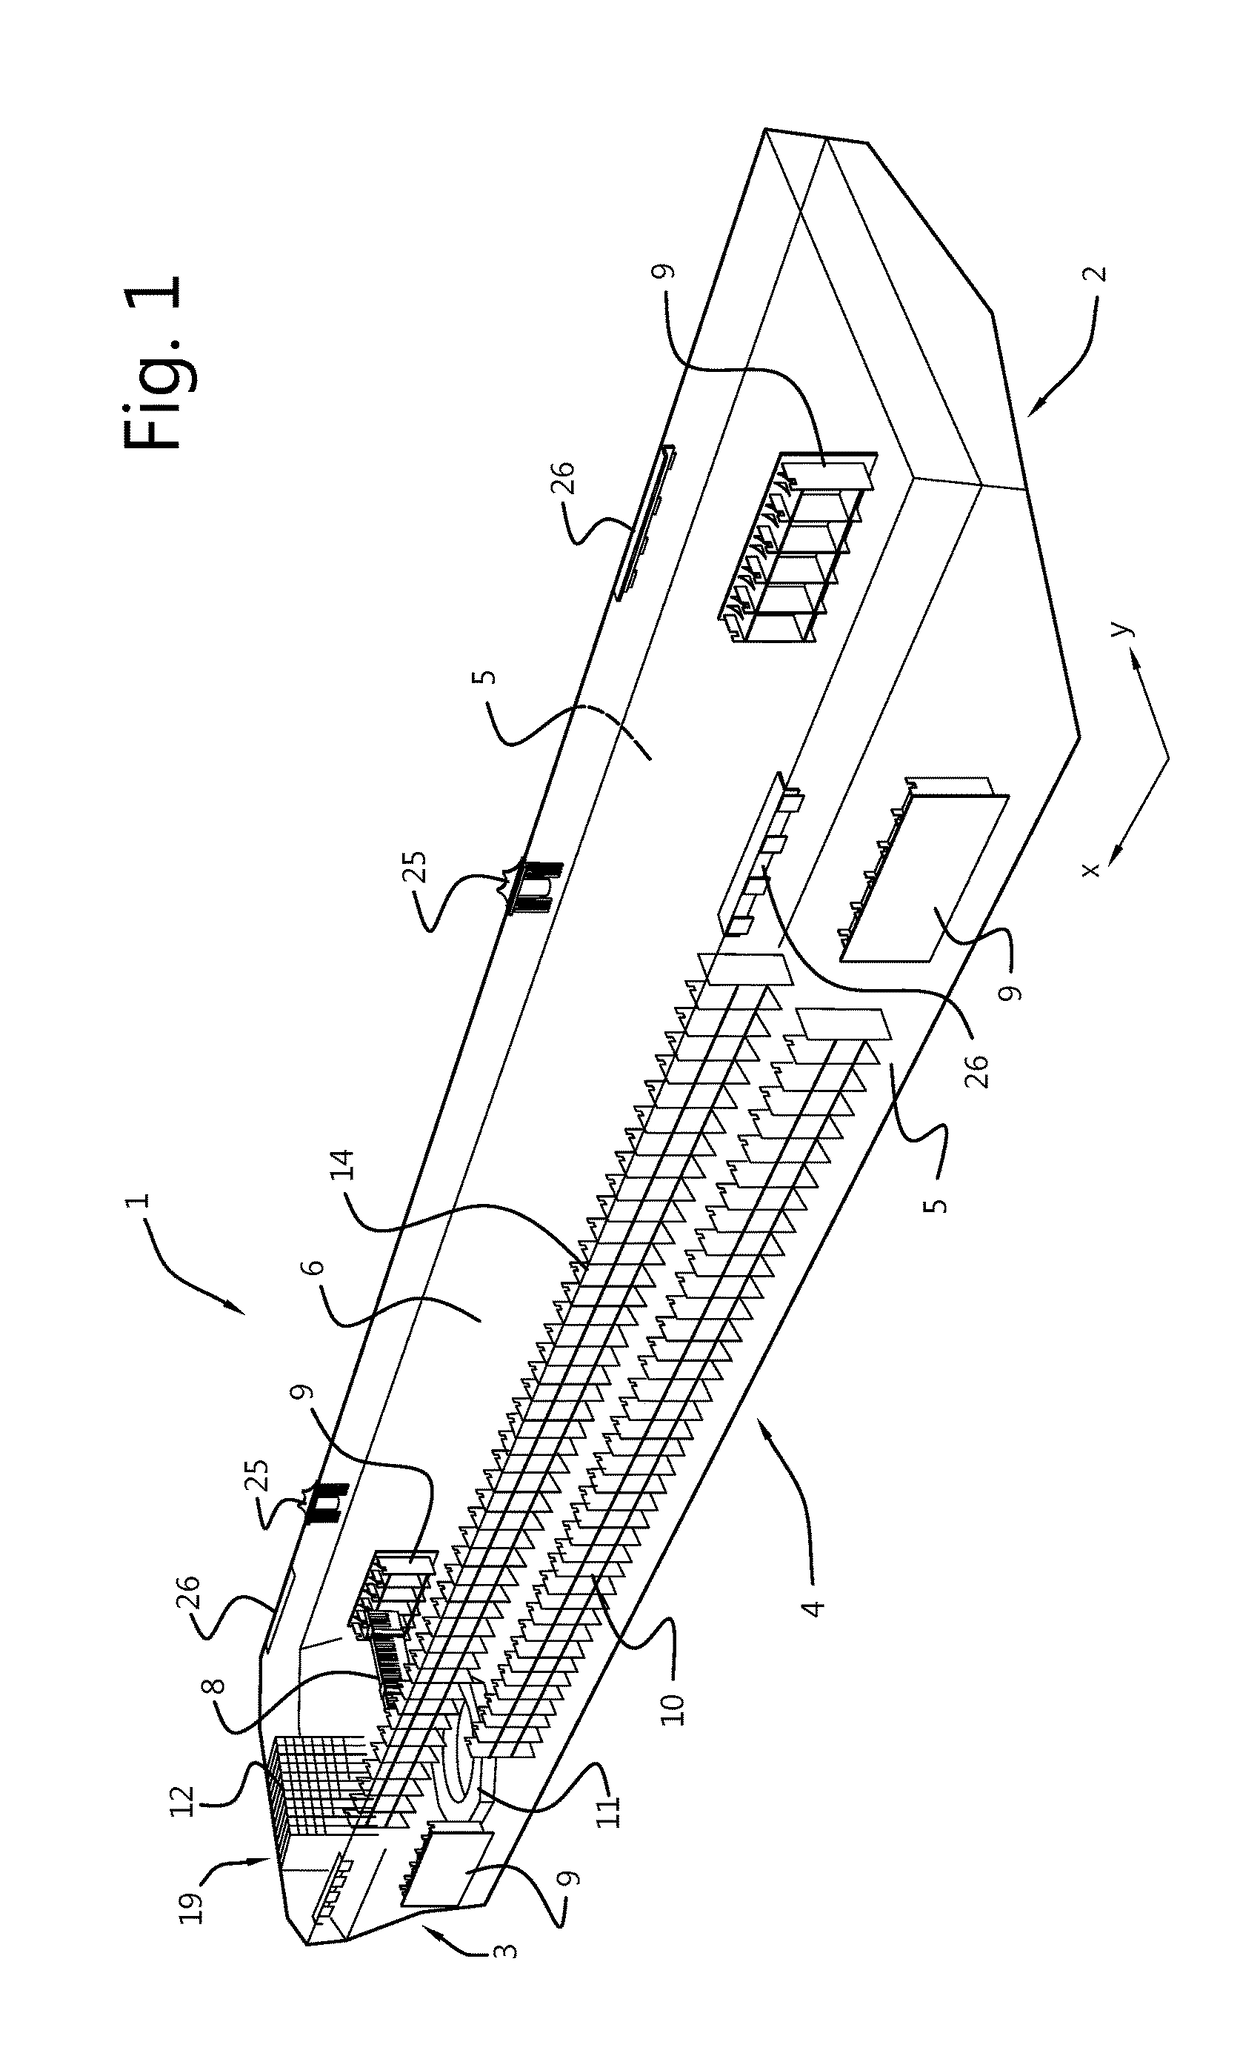 Vessel hull for use as a hull of a floating hydrocarbon storage and/or processing plant, method for producing such a vessel hull, vessel comprising such a vessel hull, as well method for producing such a vessel having such a vessel hull